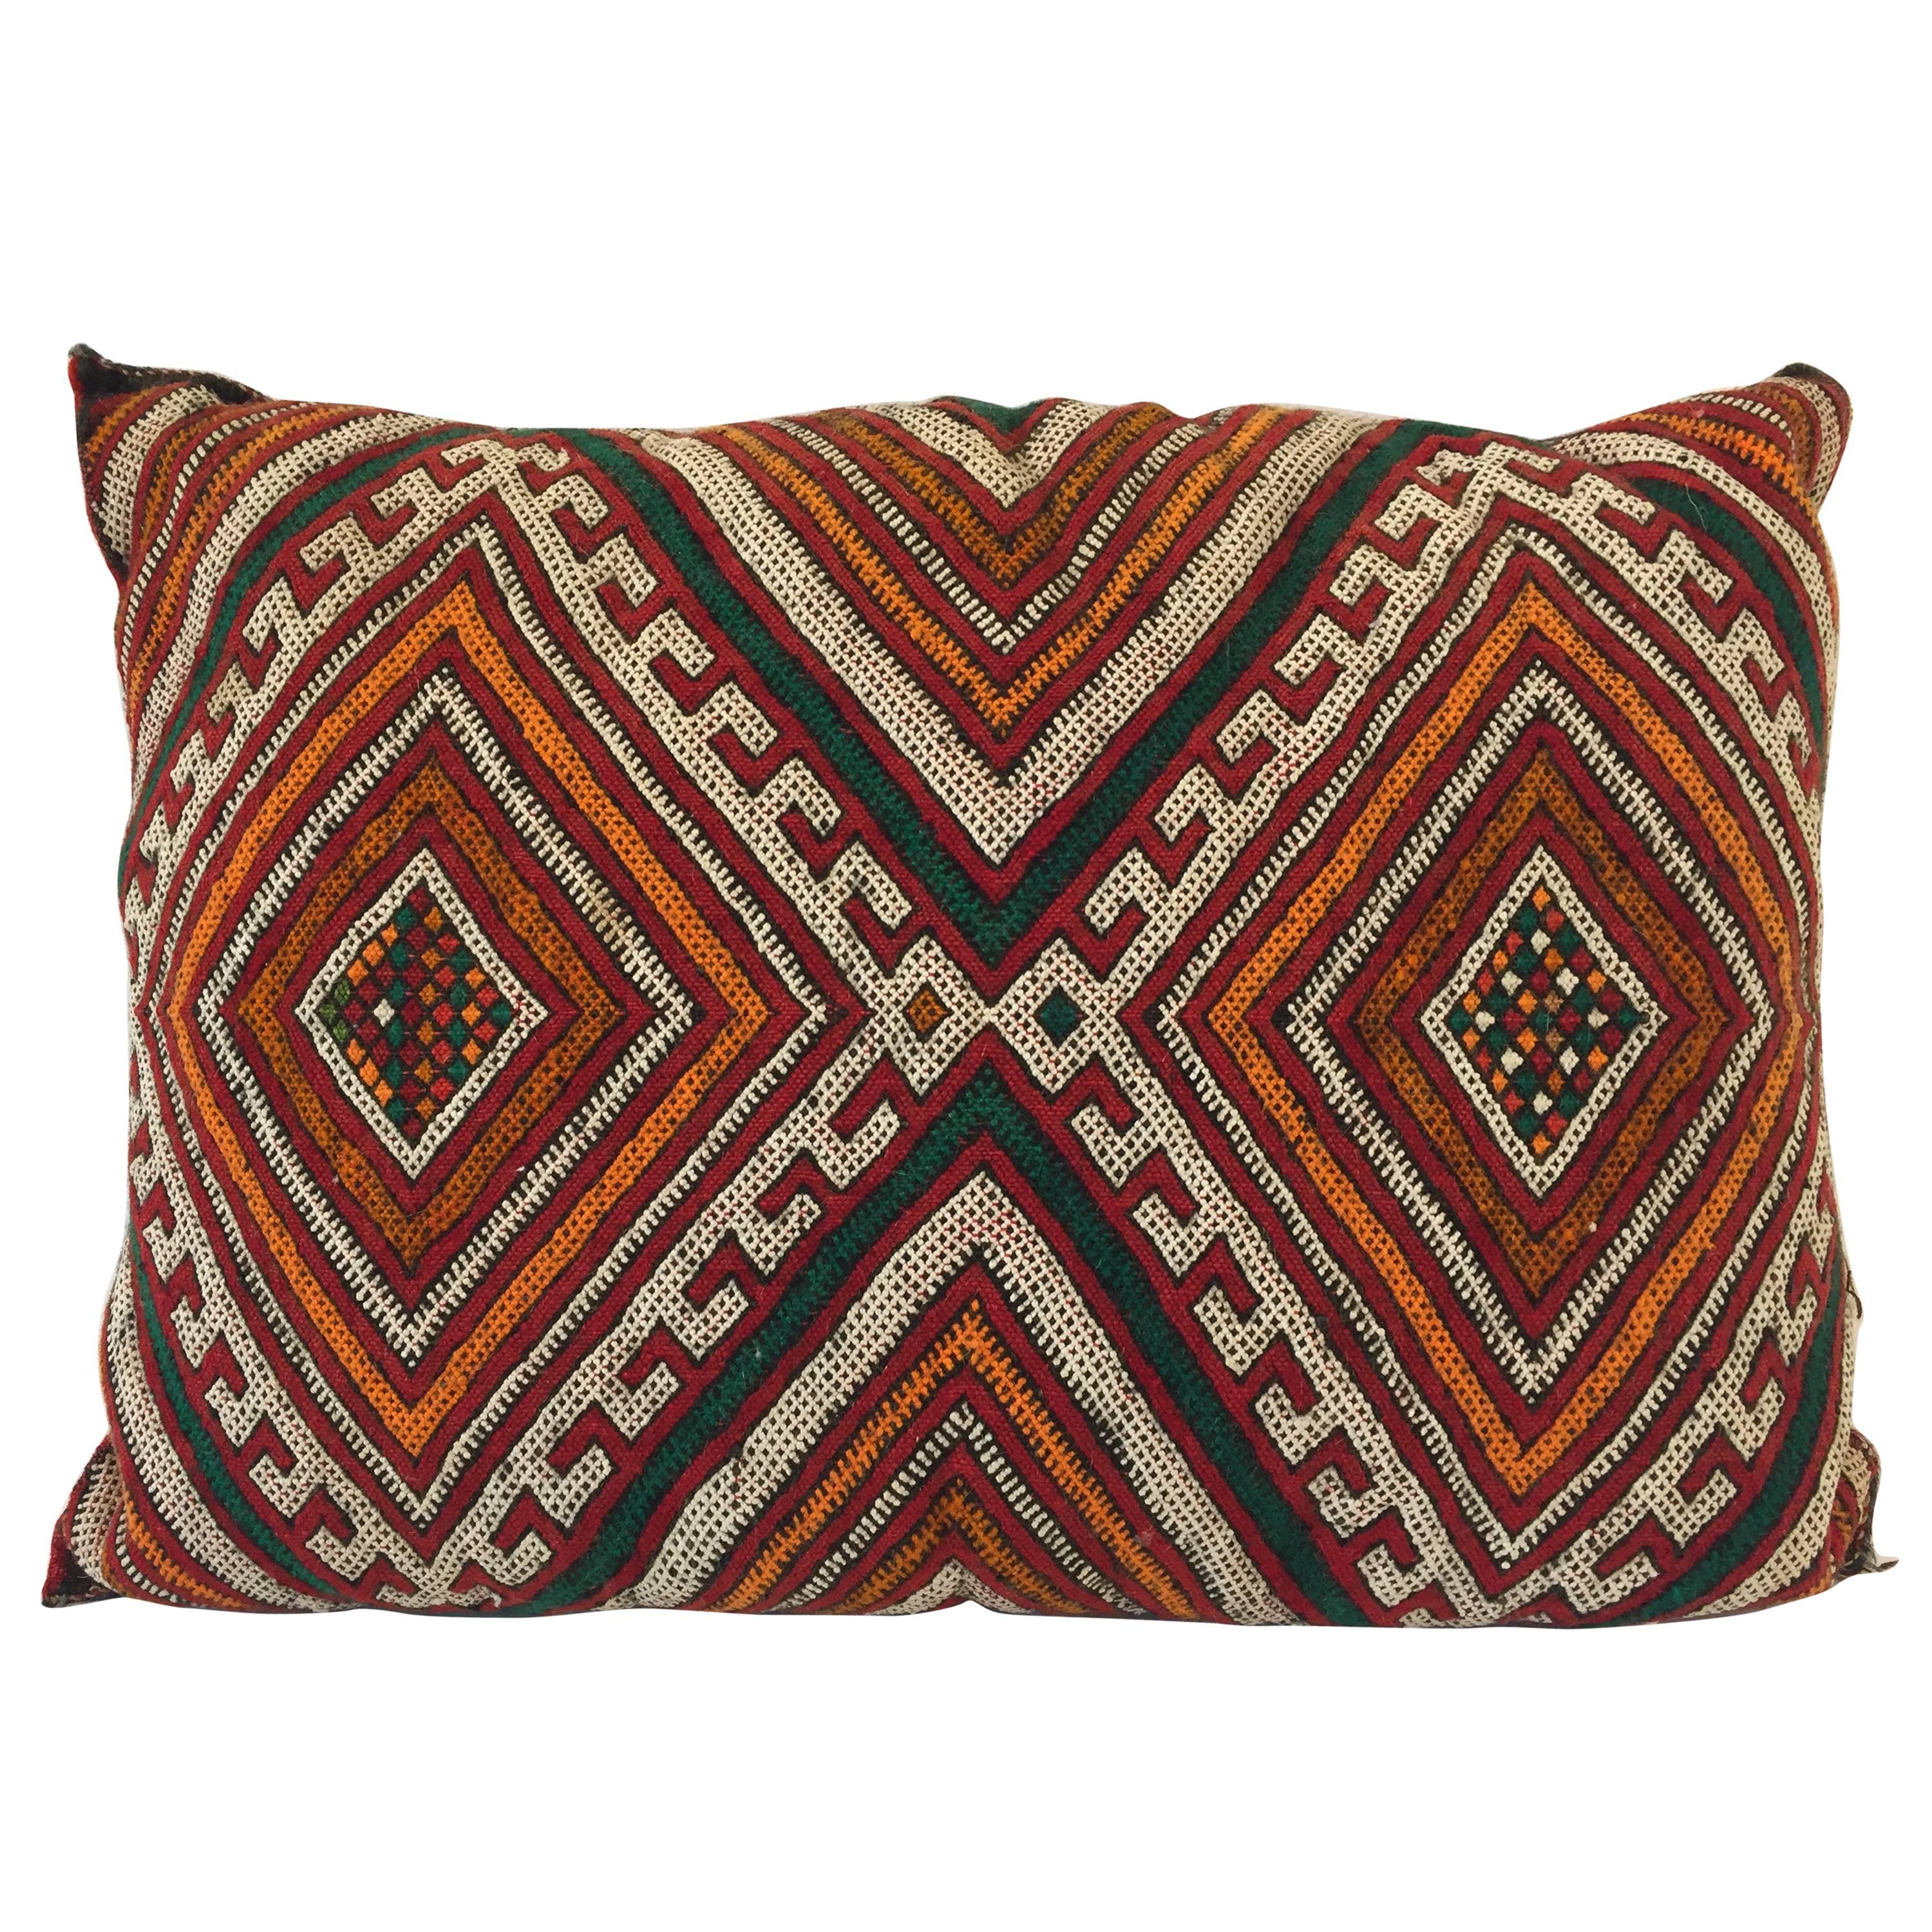 Moroccan Berber Tribal Pillow with African Designs